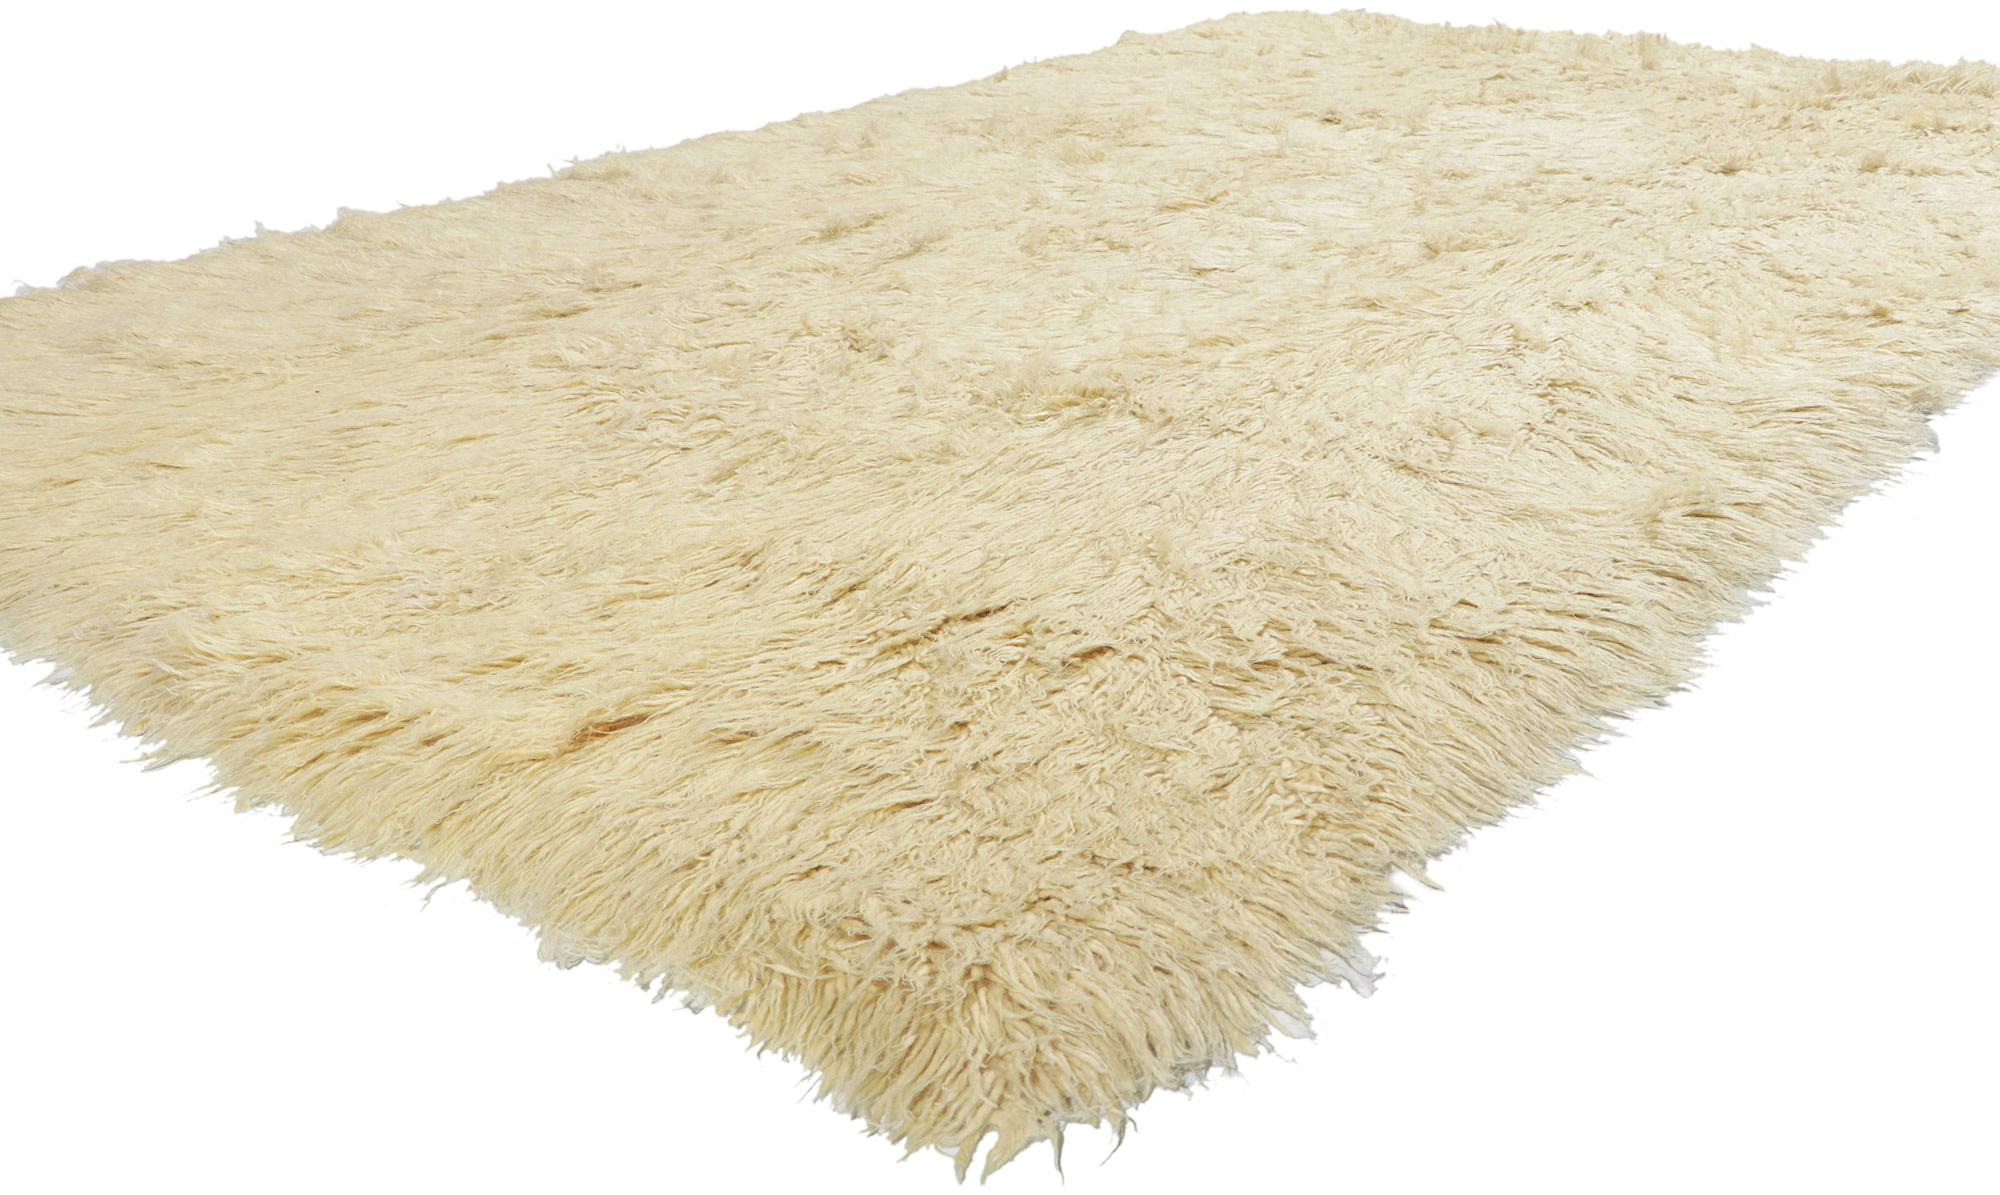 78059 vintage Greek Flokati rug with Mid-Century Modern Design 05'10 x 09'08. Effortless beauty combined with simplicity and minimalist style, this hand-woven wool vintage Greek Flokati rug provides a feeling of cozy contentment without the clutter.